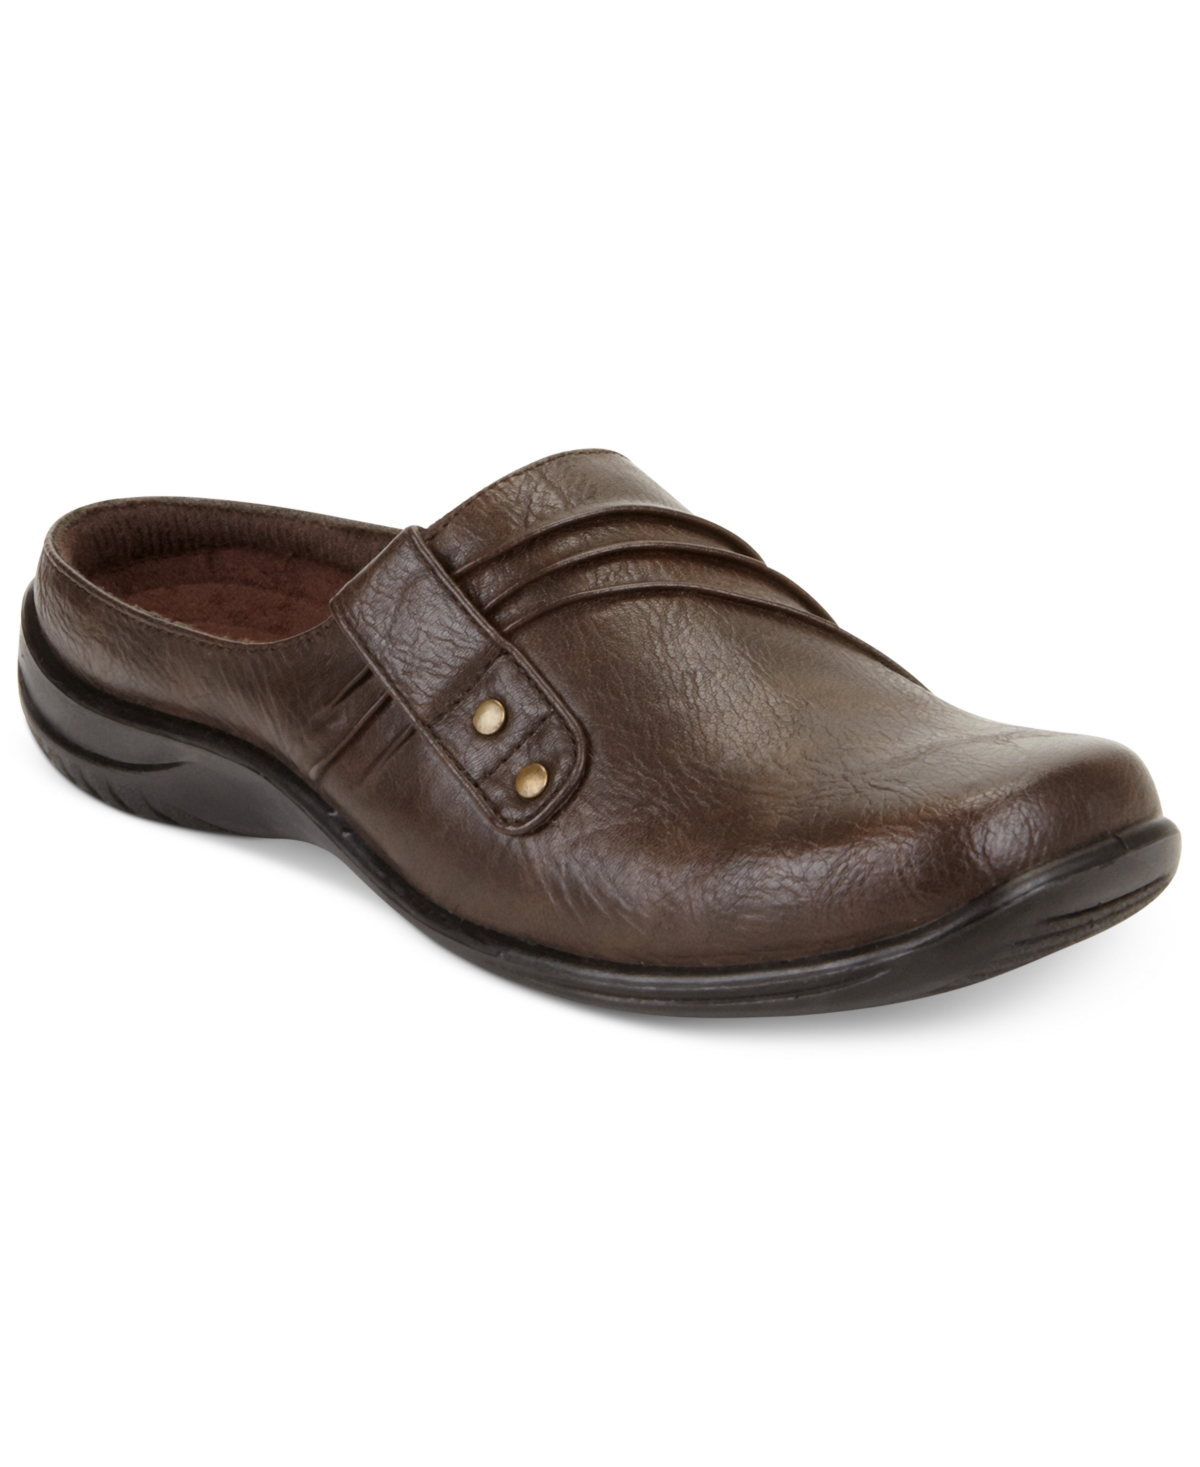 Easy Street Holly Comfort Mules Women's Shoes